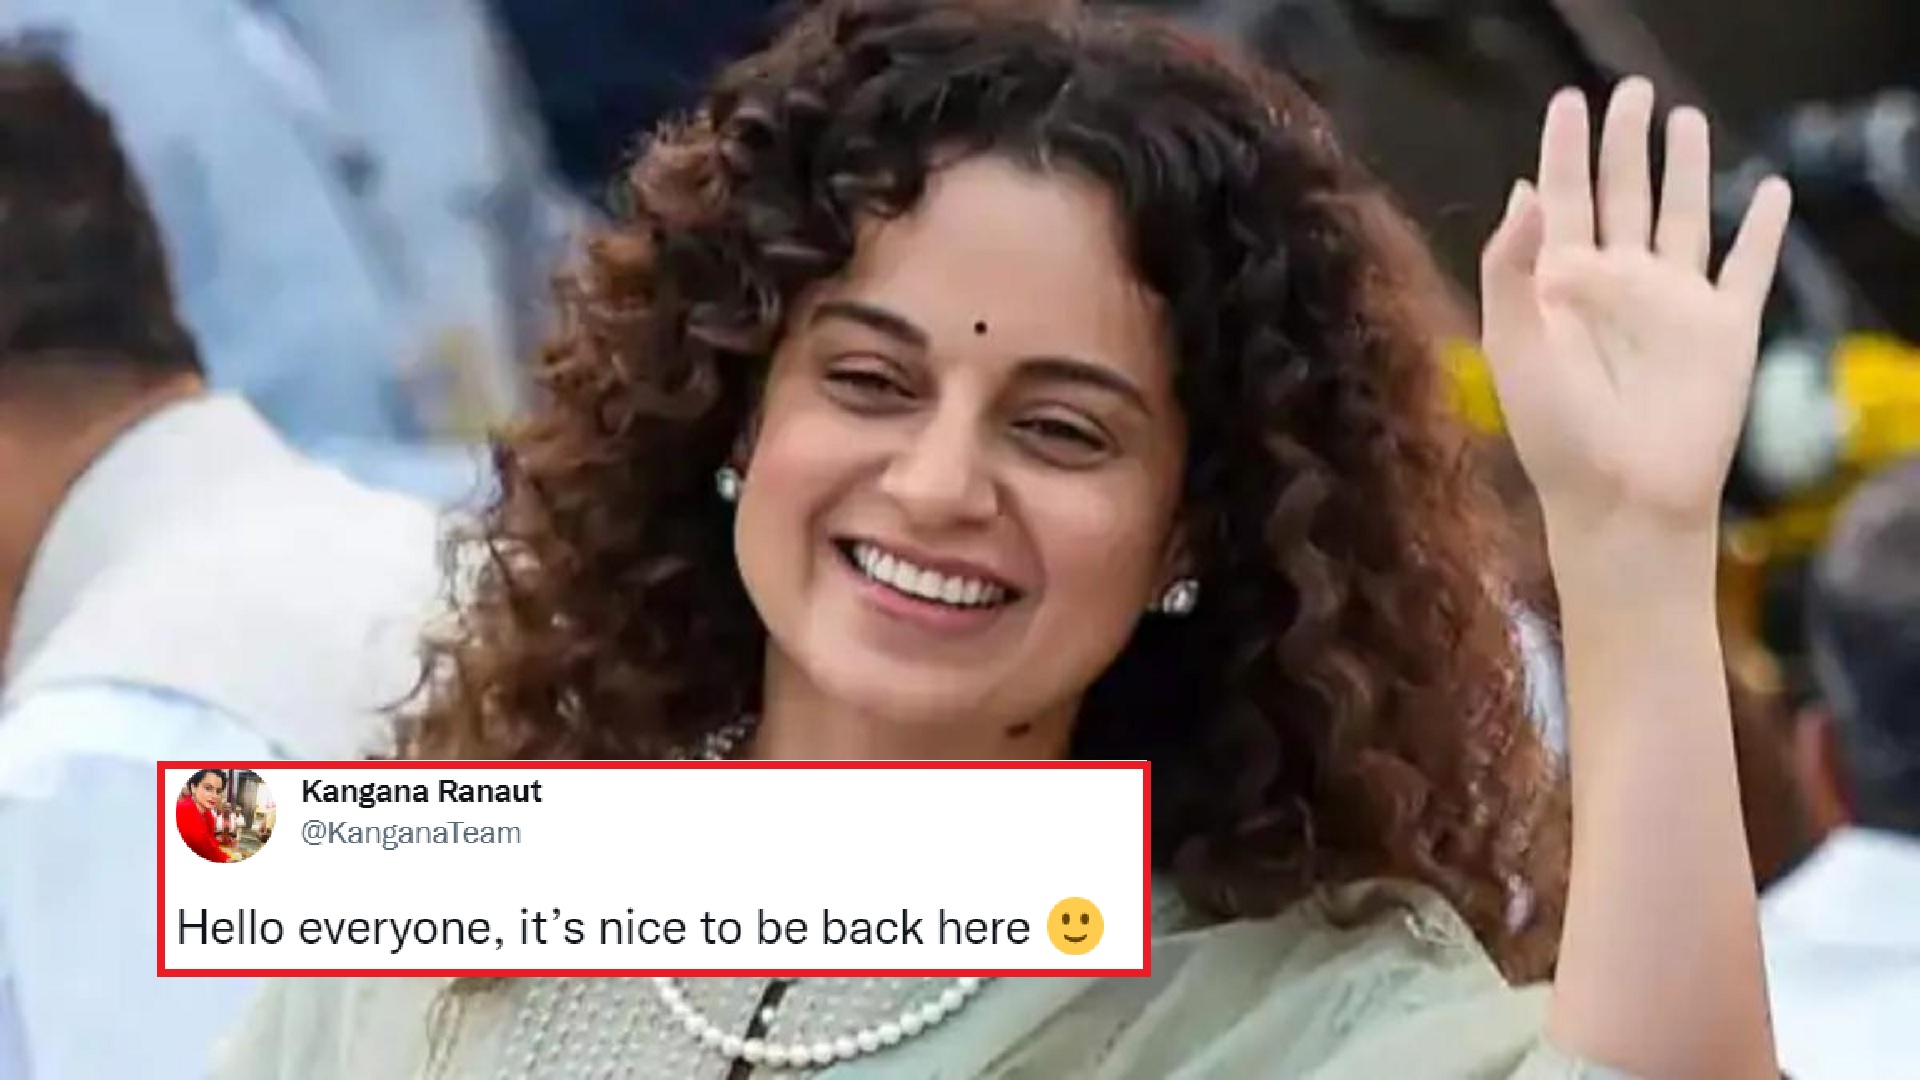 Kangana Ranaut Is Back On Twitter: Actress’ Twitter Account Restored After It Was Banned In 2021